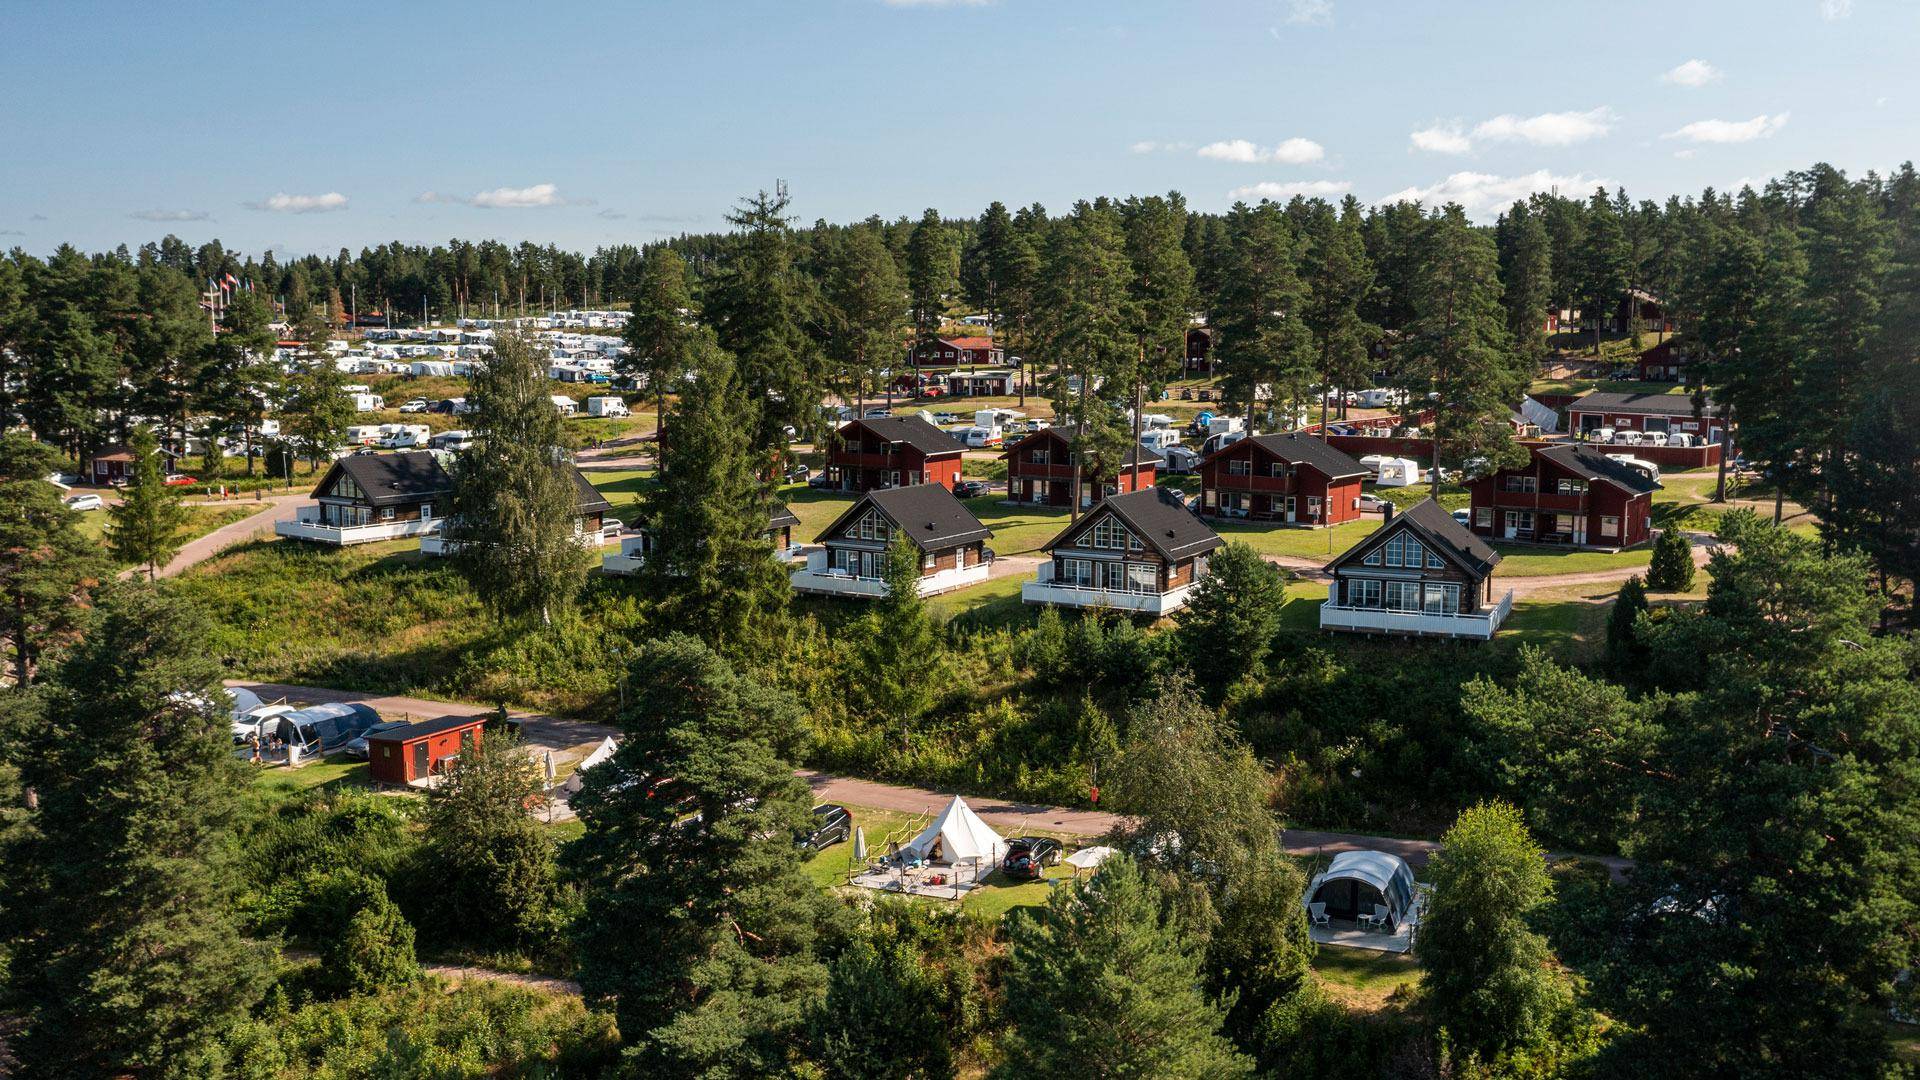 An aerial view of Leksand Strand resort during the summer.